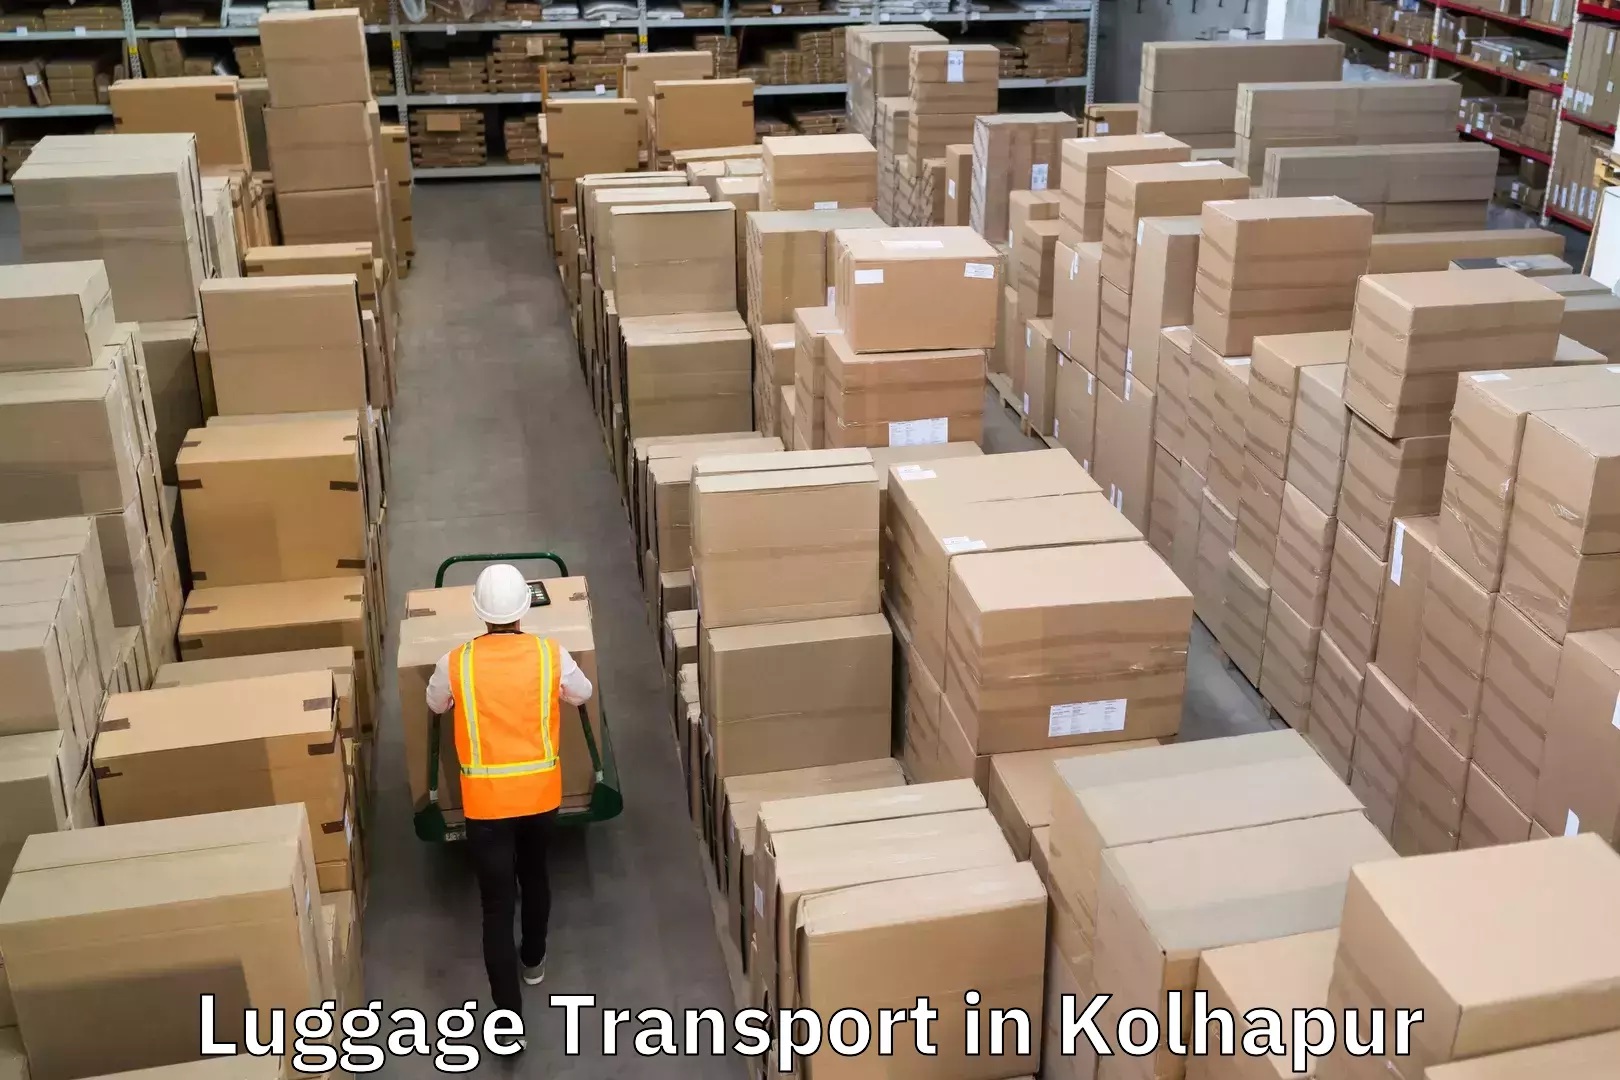 Luggage shipping planner in Kolhapur